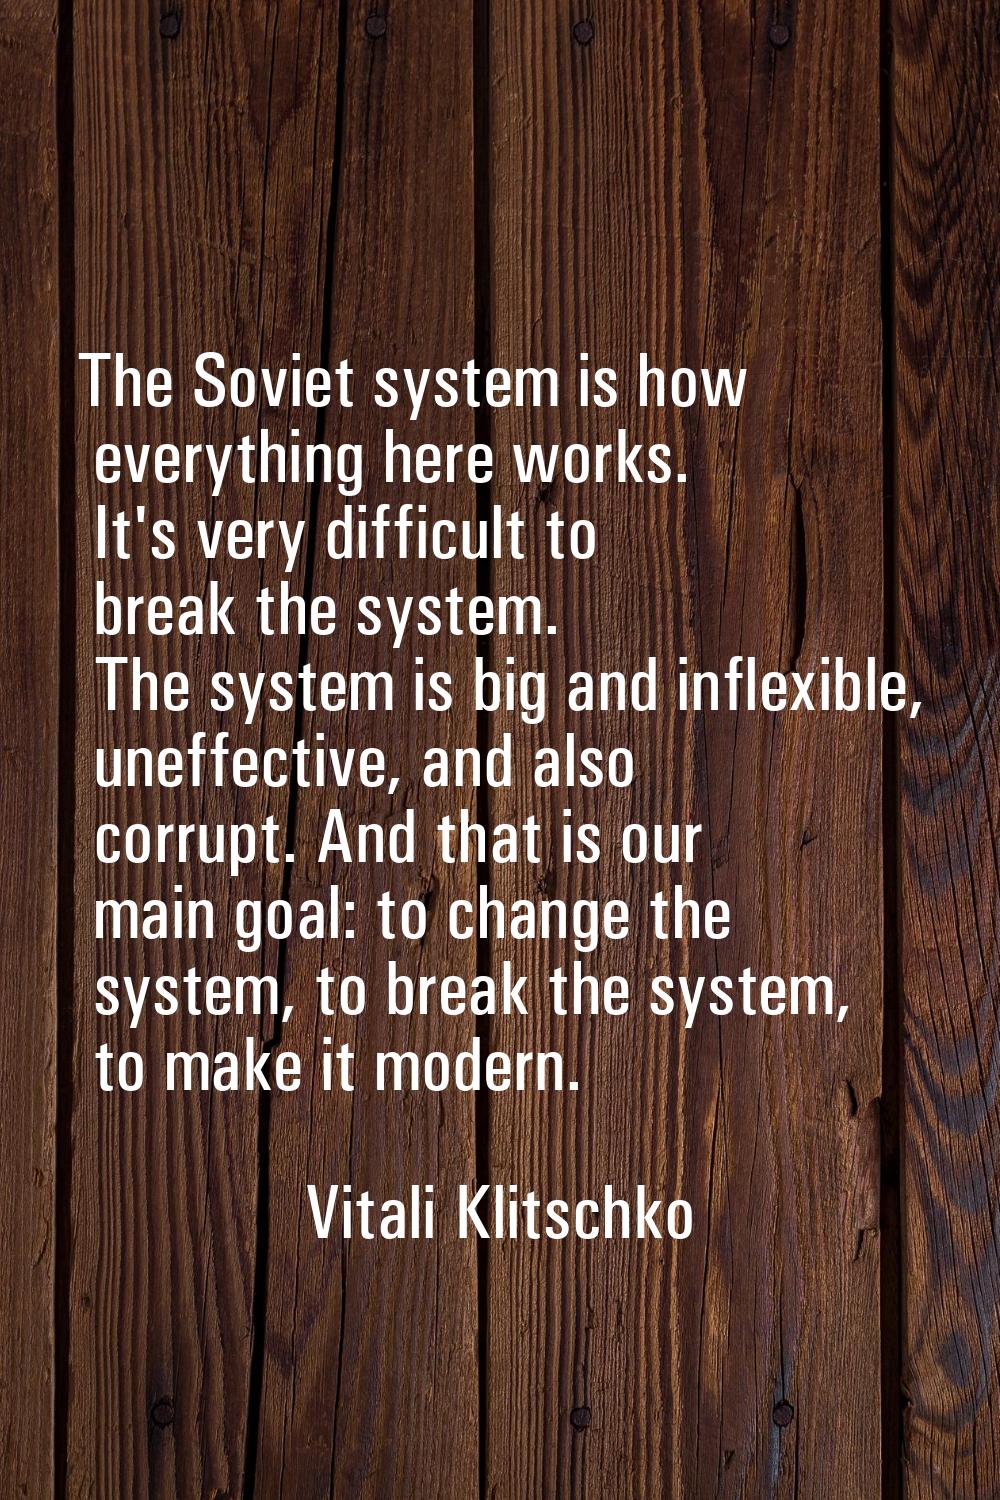 The Soviet system is how everything here works. It's very difficult to break the system. The system